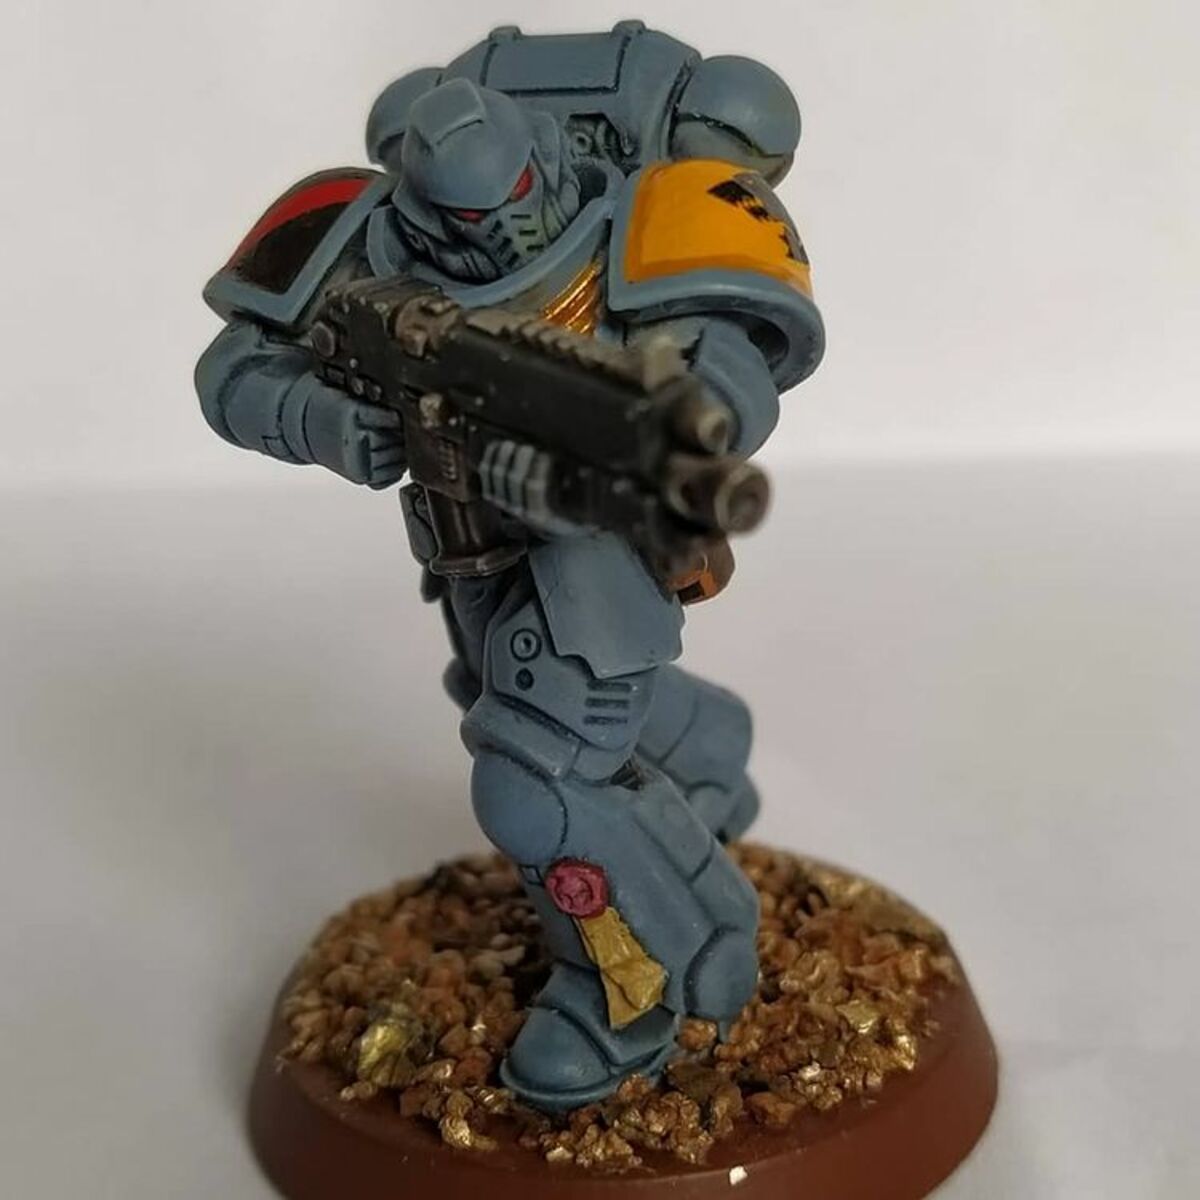 Space Wolves Intercessors